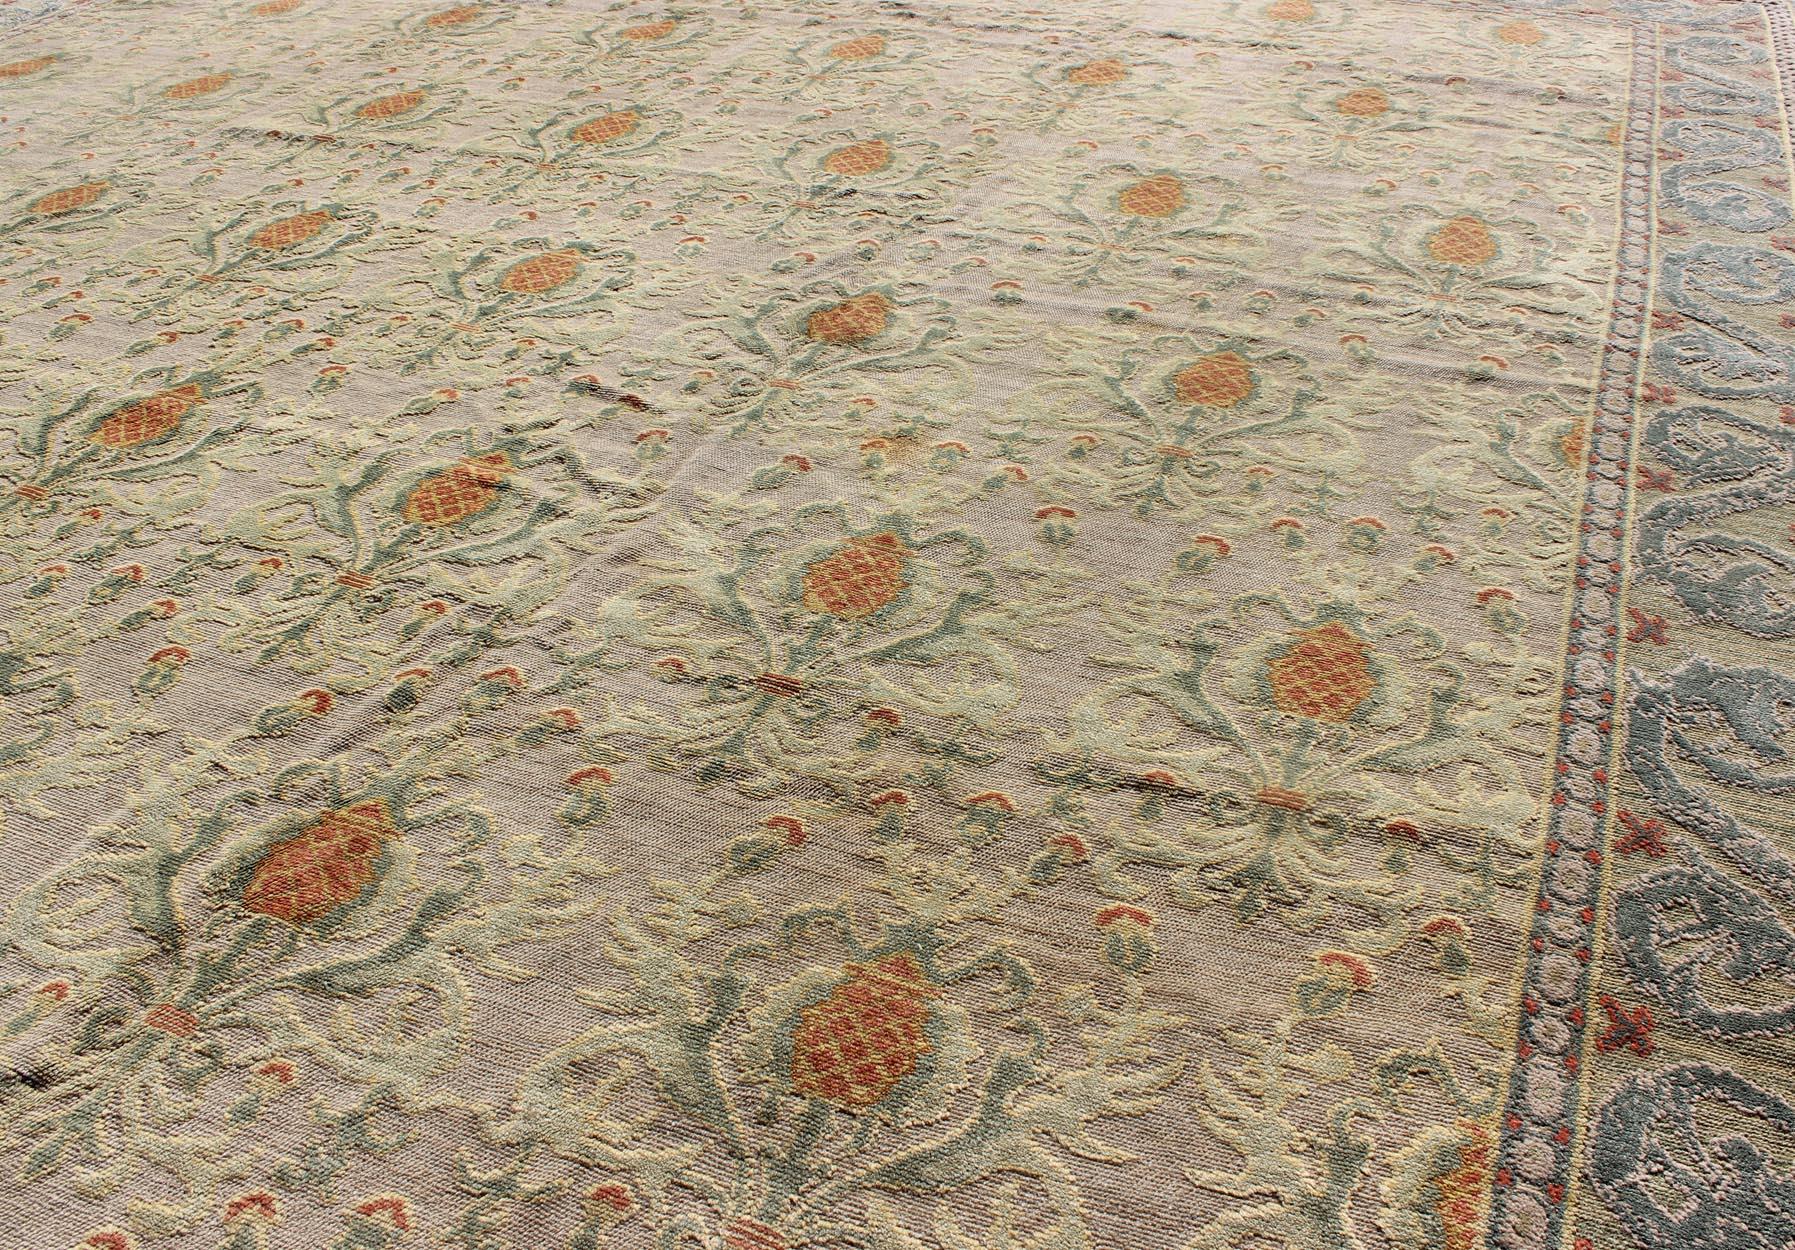 Square Sized Antique Spanish Carpet in Green, Orange and Gray/Blue 3